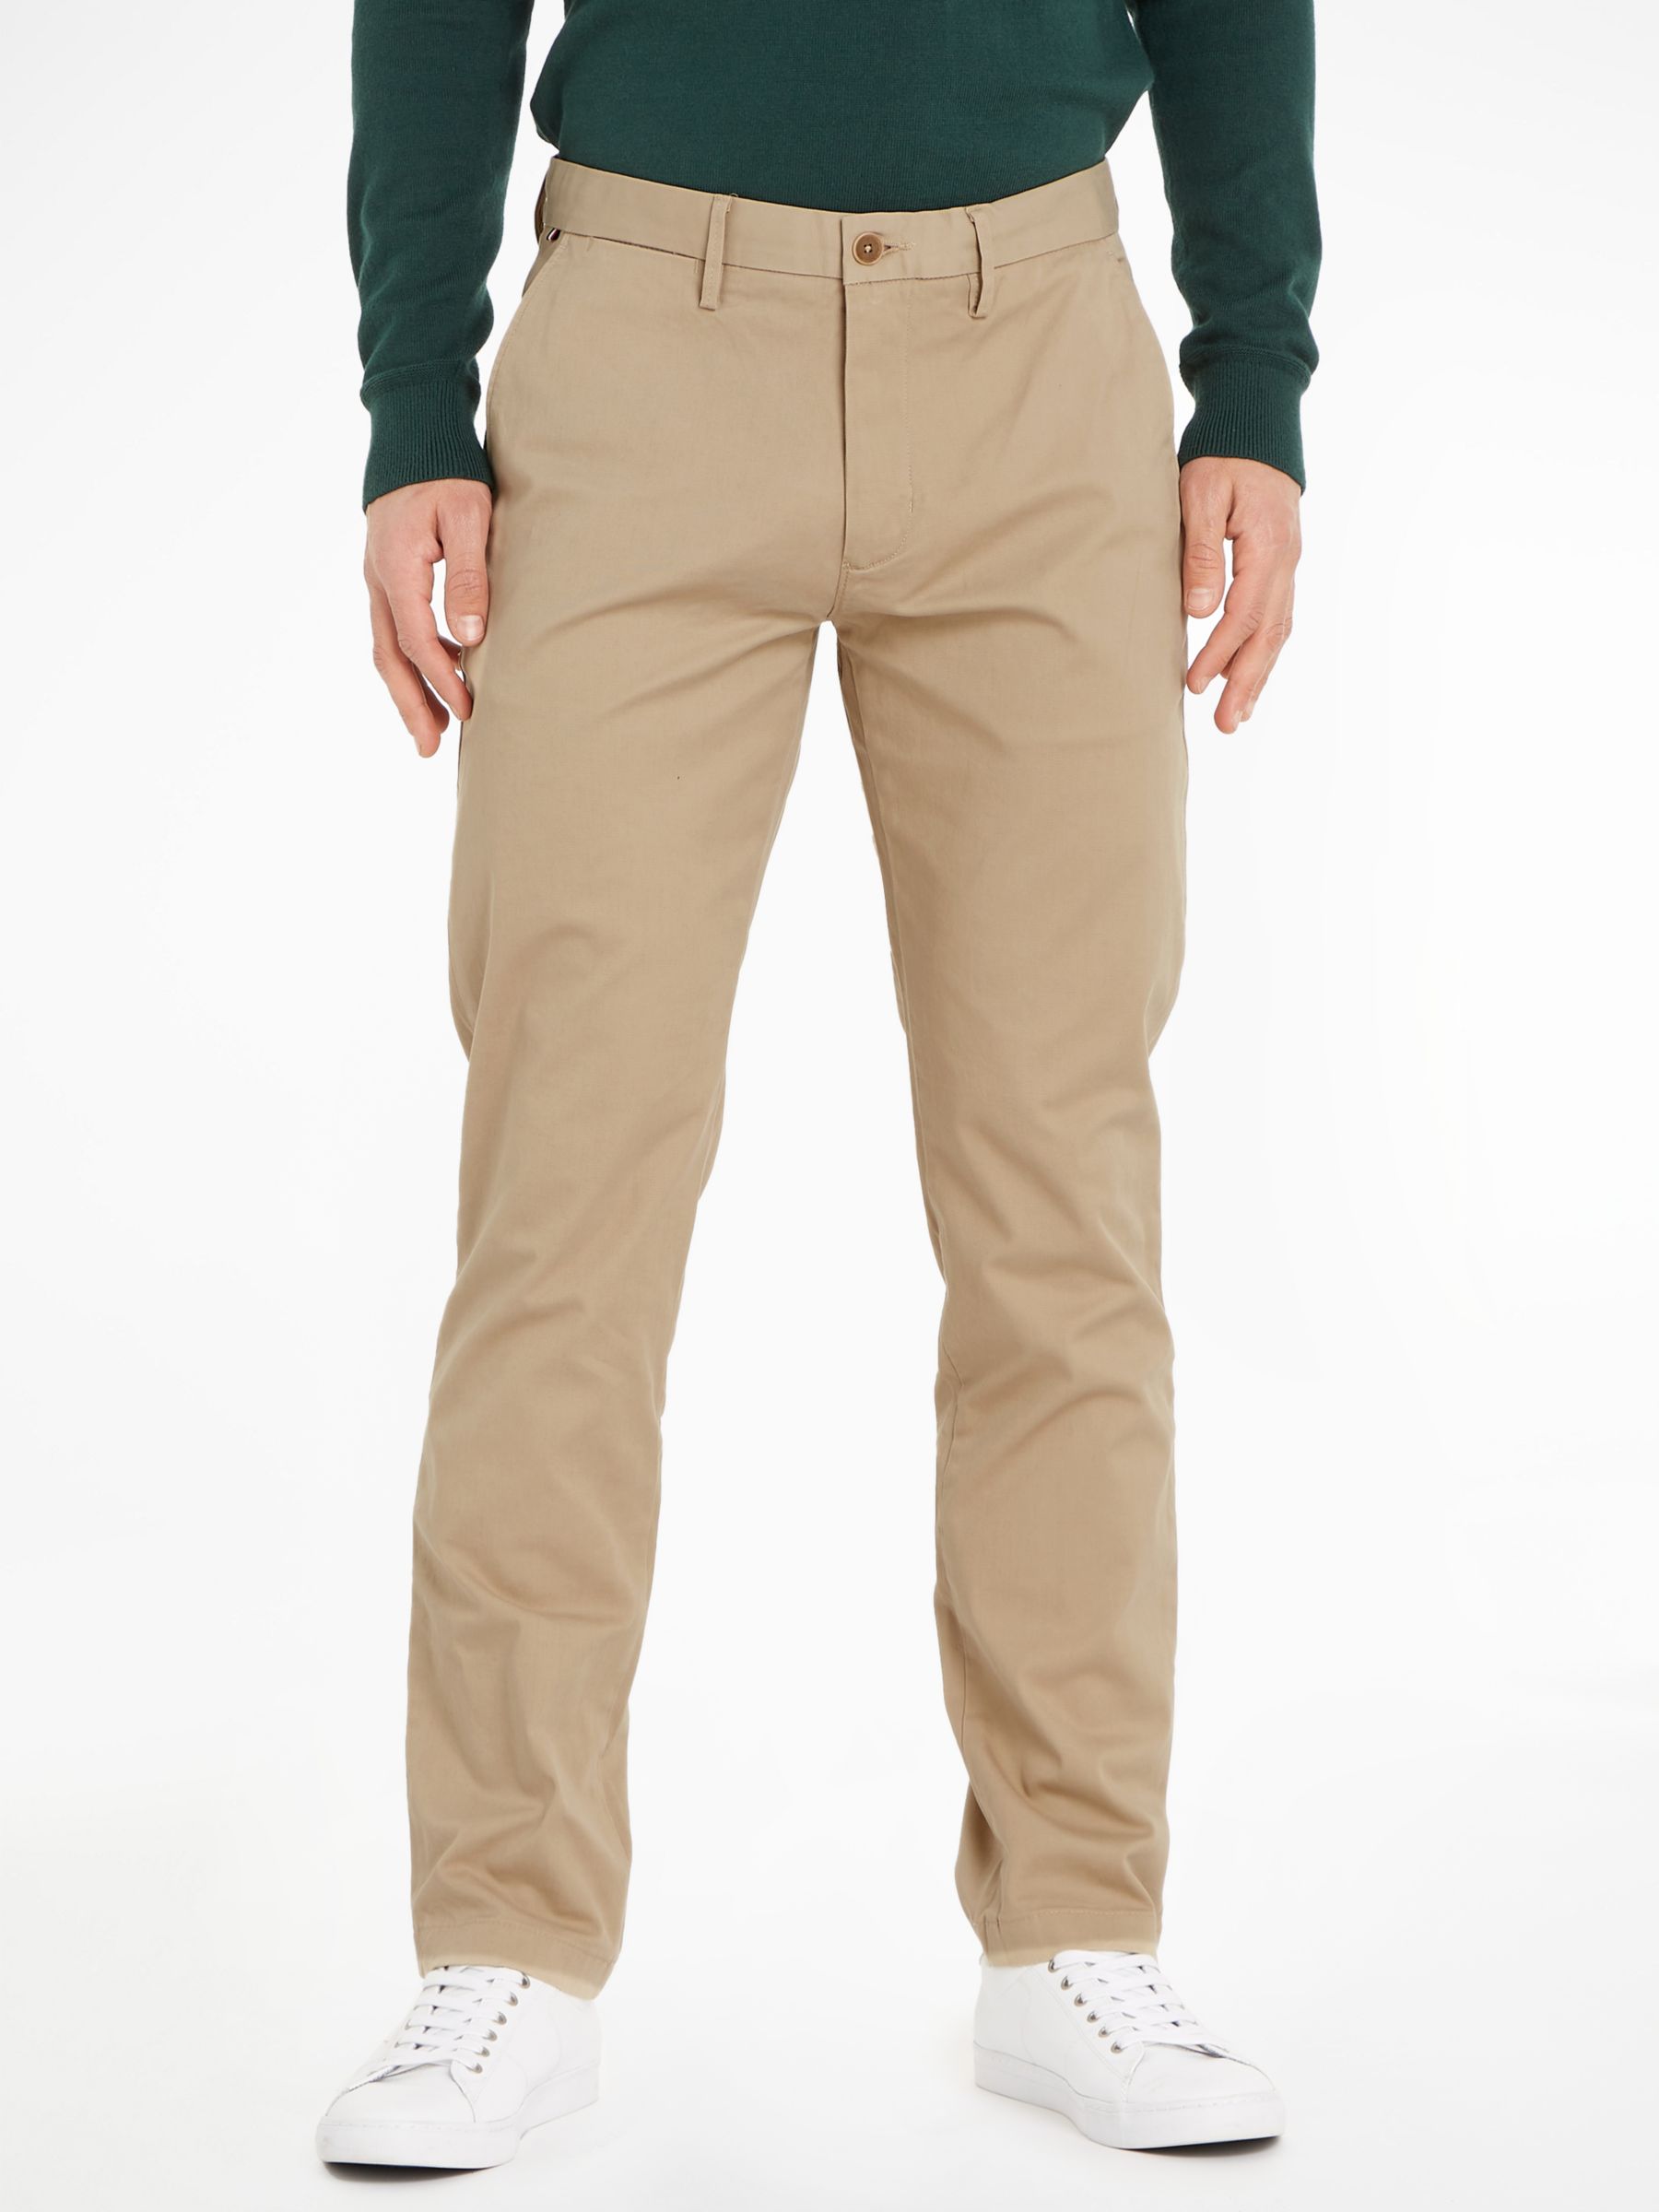 Tommy Straight Fit Chinos, Batique Khaki at John Lewis Partners